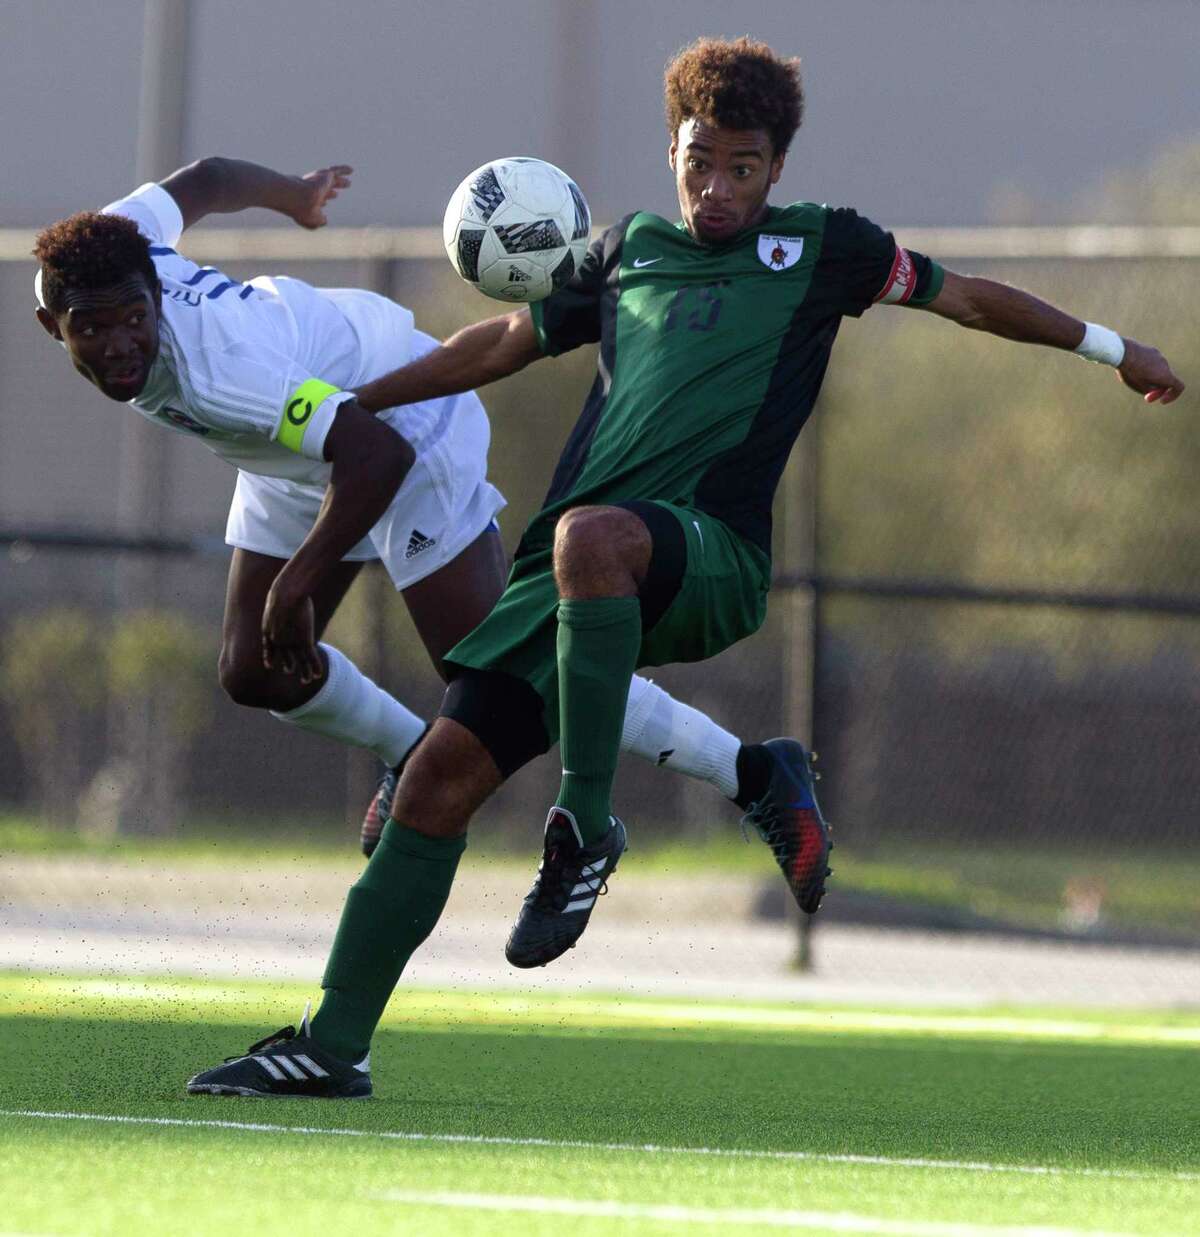 The Woodlands midfielder Wesley Mitchell (15) tries to control the ball in front of the goal against Oak Ridge midfielder Devonte Brown (10) during the first period of a District 12-6A high school boys soccer match at Woodforest Bank Stadium Thursday, March 2, 2017, in Conroe. The Woodlands defeated Oak Ridge 1-0.